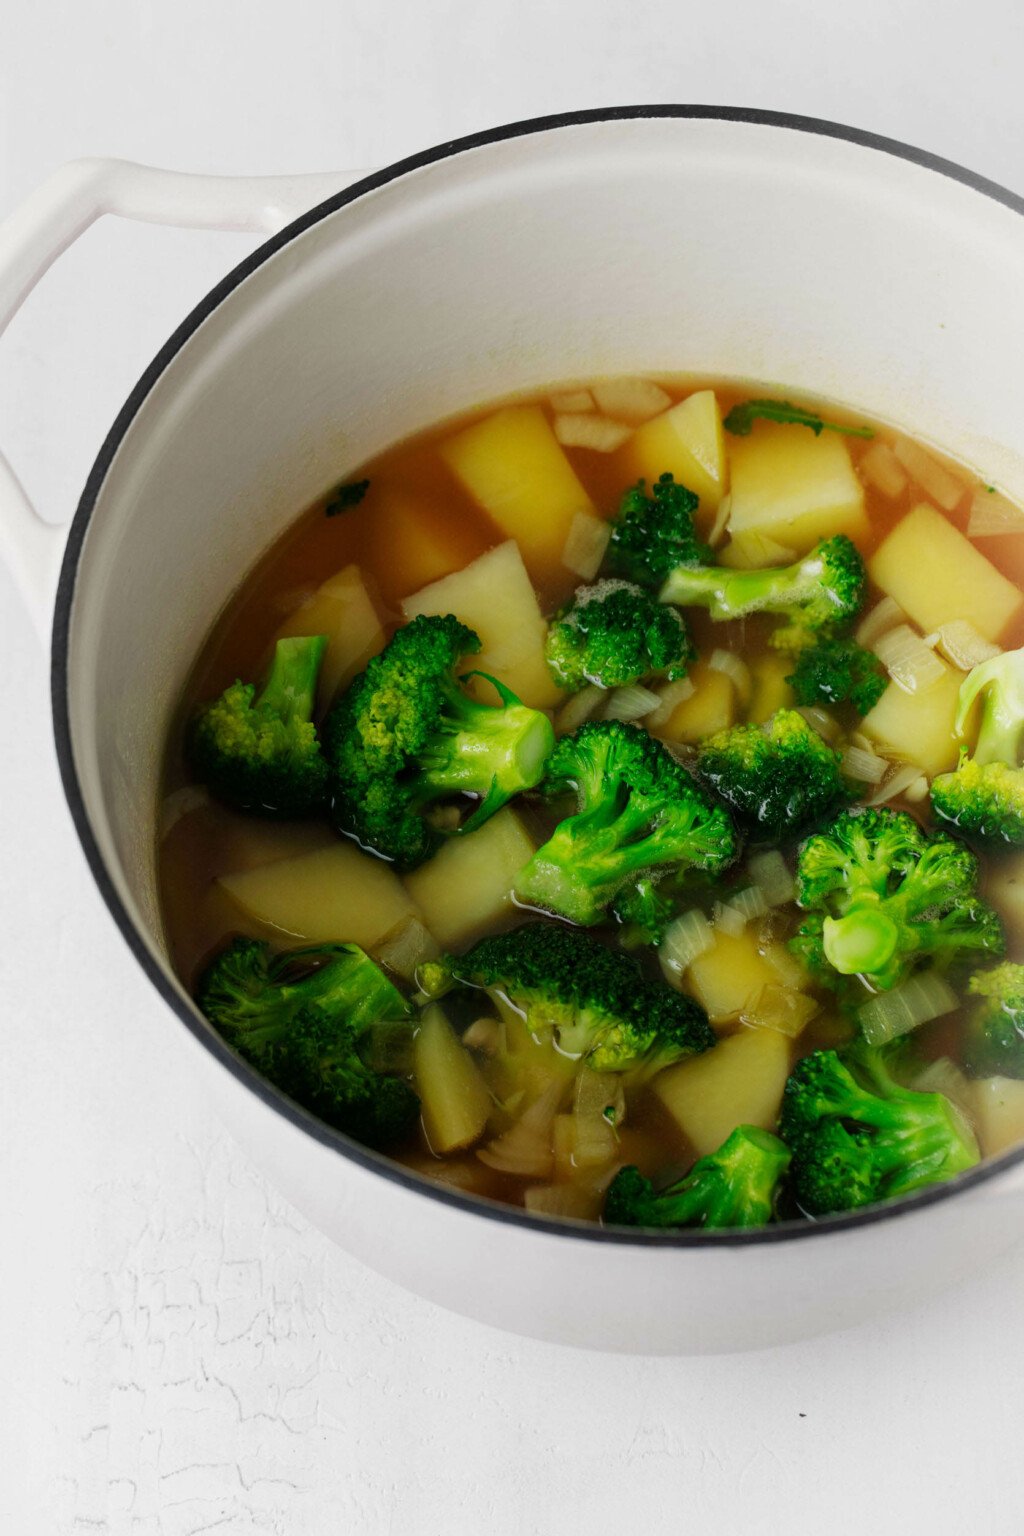 A soup pot holds potatoes, broccoli, and broth.